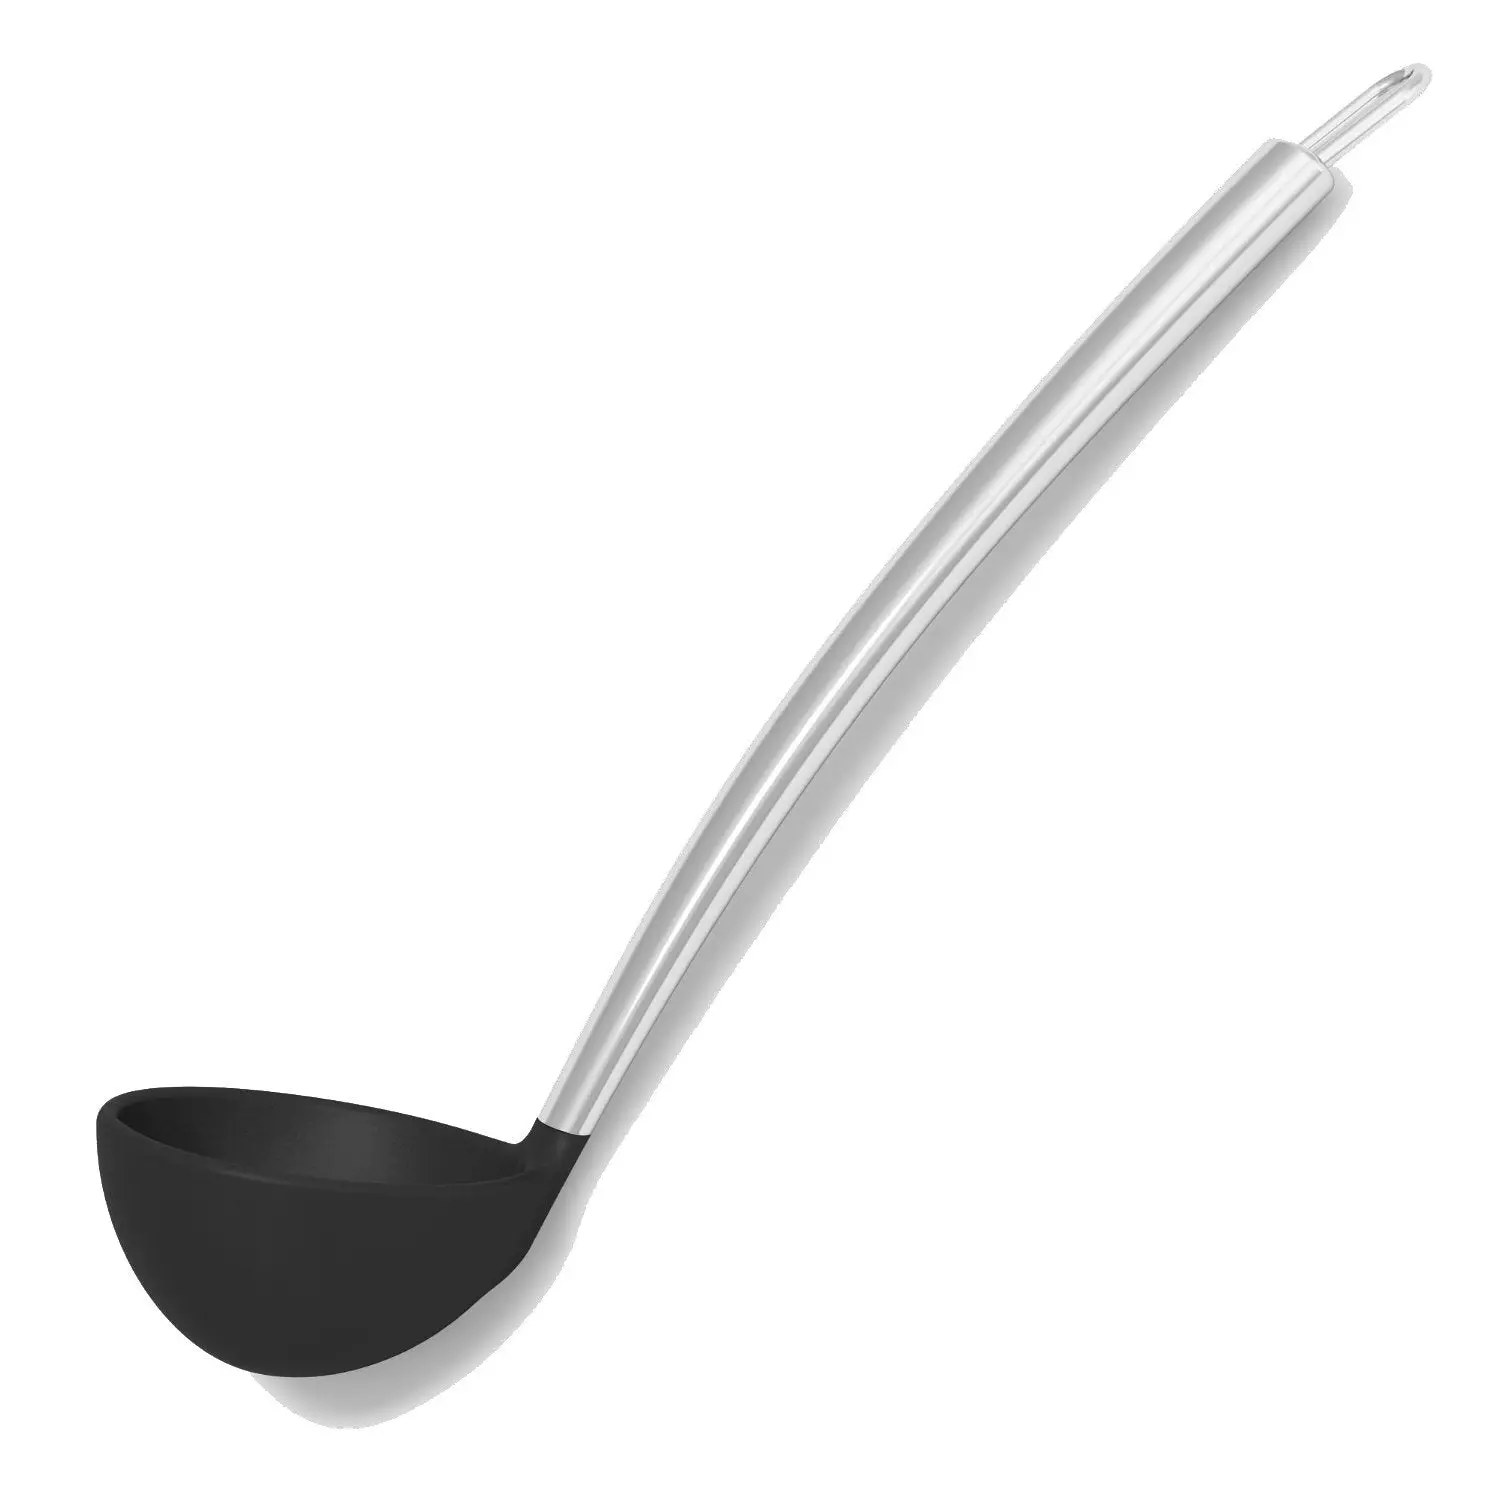 Silicone Cooking Utensils: Say No to Plastic — Detox Me Tuesday